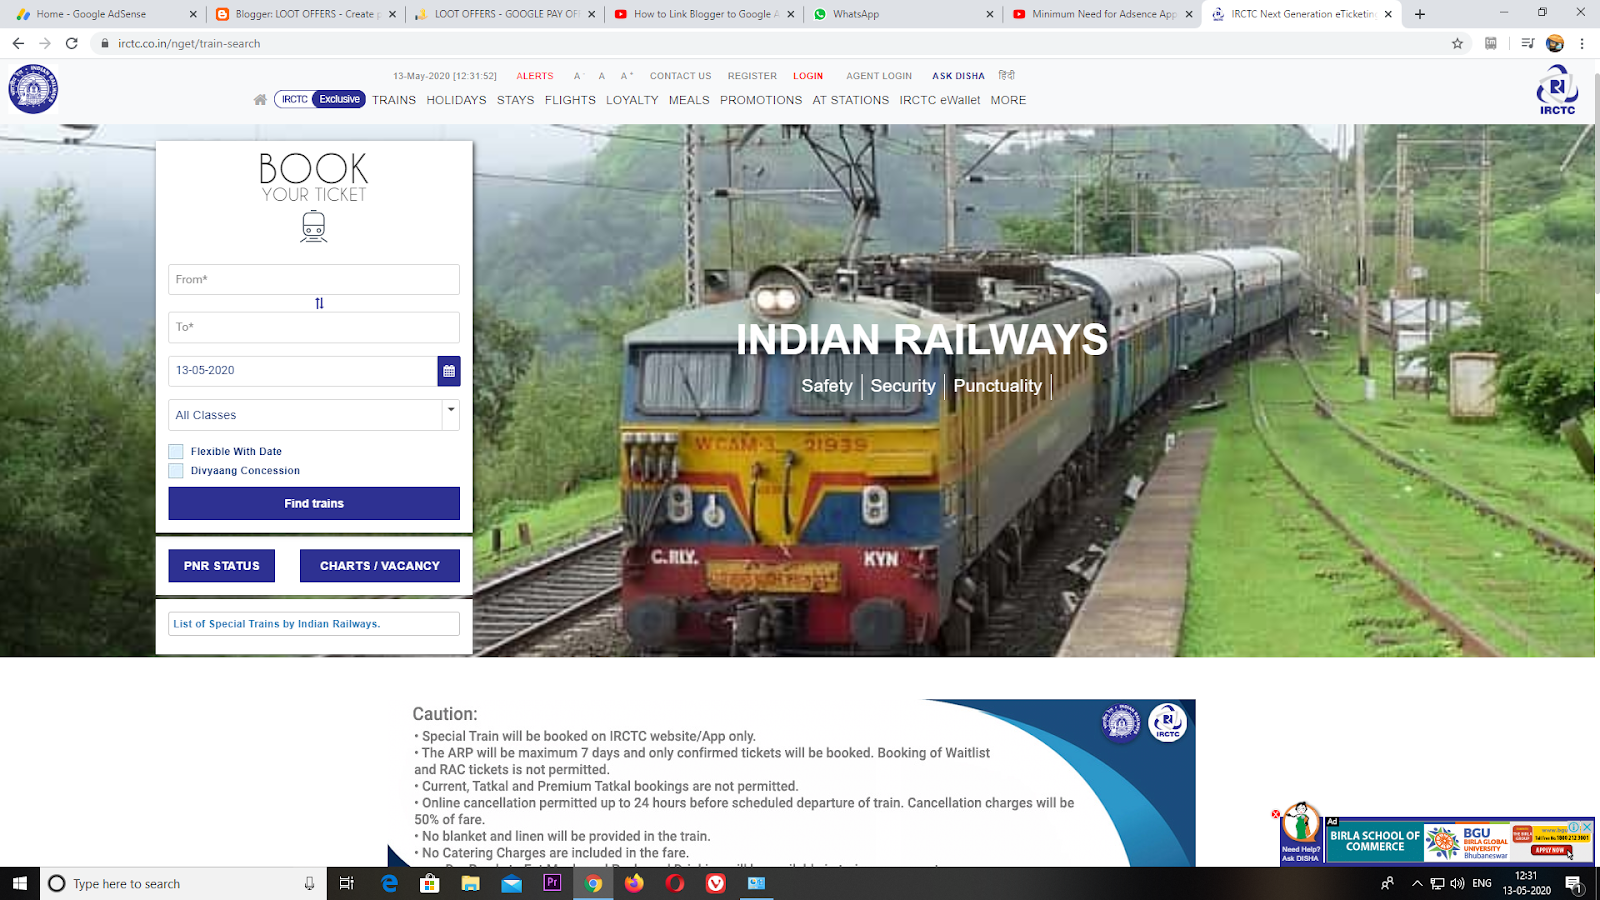 HOW TO BOOK TRAIN TICKET ONLINE IN LOCKDOWN | MAY 2020